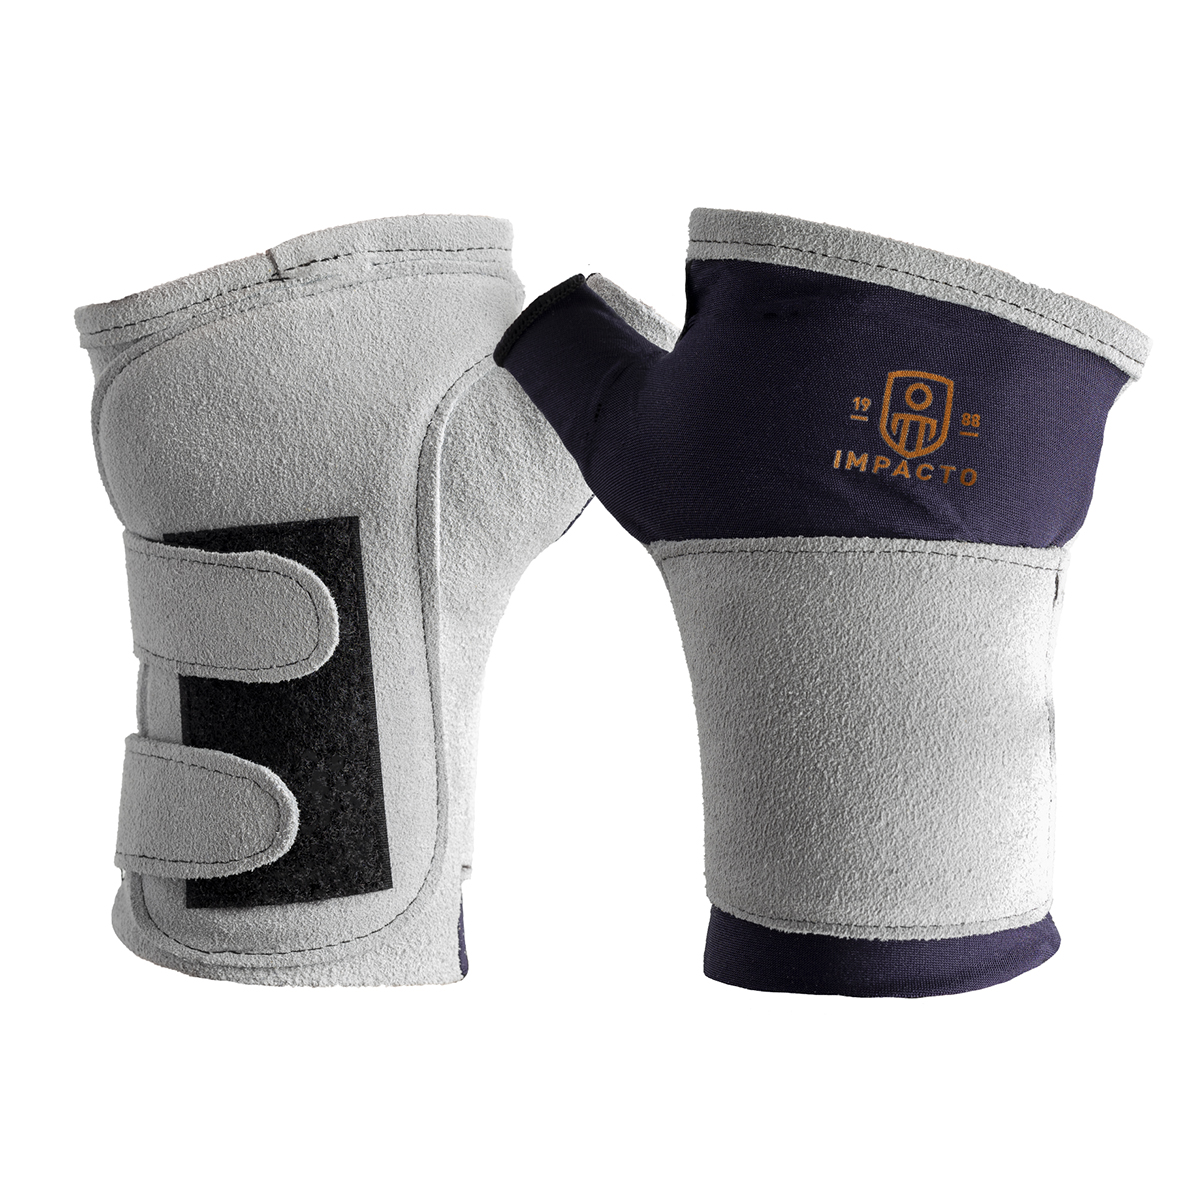 IMPACTO 700-10MLH WRIST SUPPORT IMPACT SUEDE - Wrist Supports